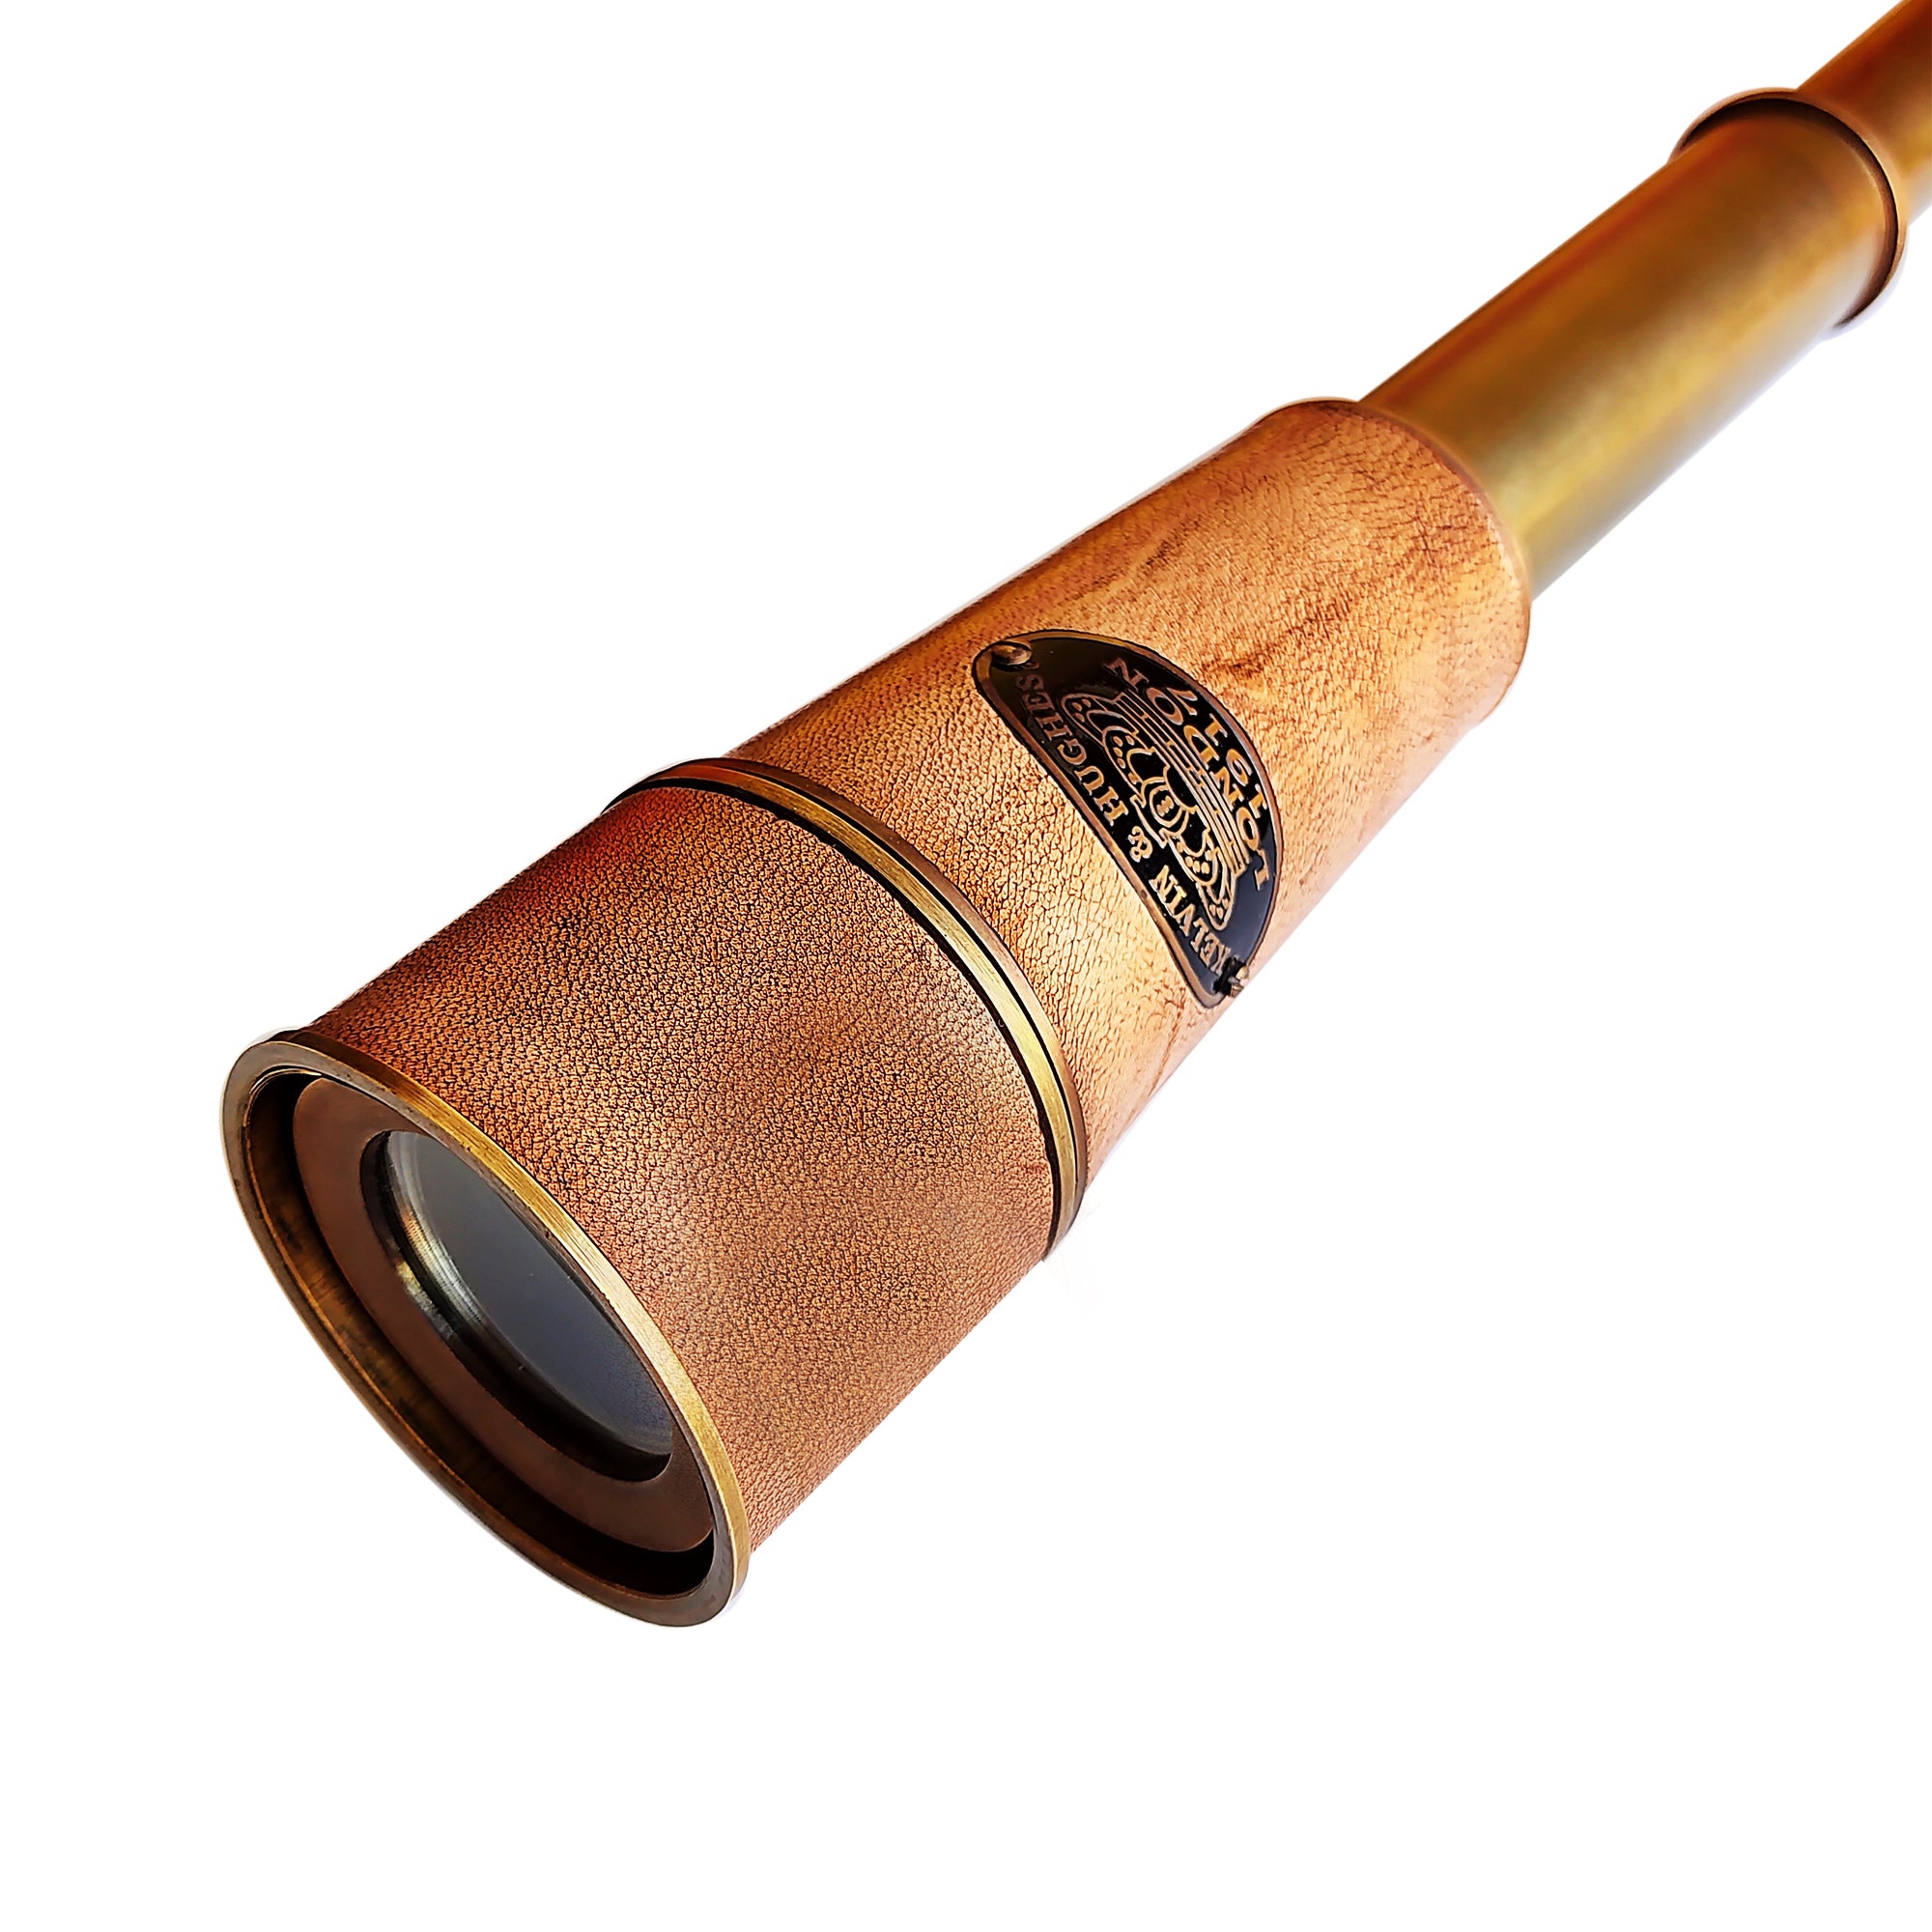 Copy of special Engraved Nautical Pirate Spyglass handheld Brass marine Antique Telescope with wooden gift box